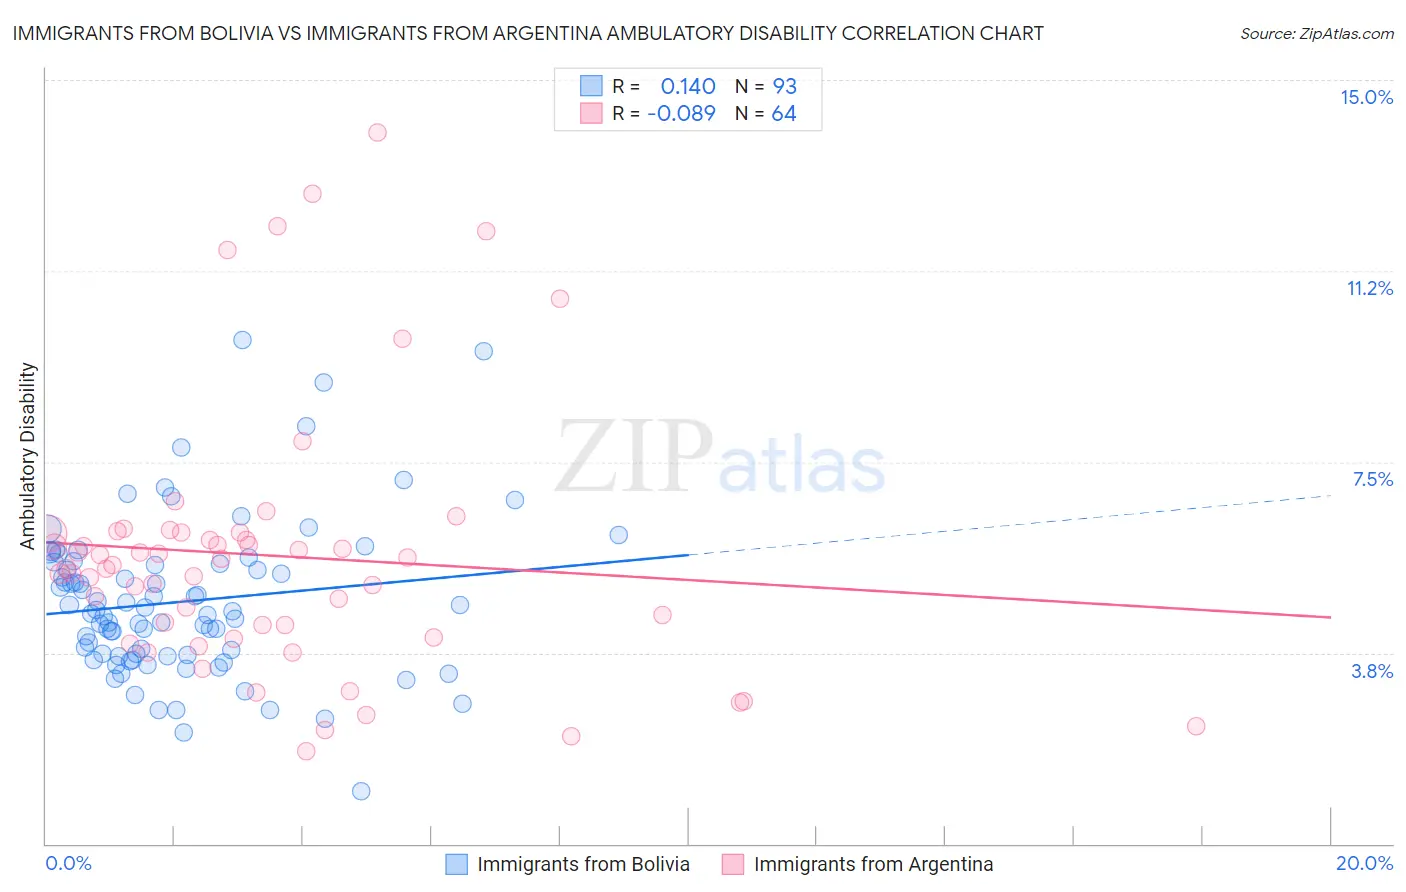 Immigrants from Bolivia vs Immigrants from Argentina Ambulatory Disability